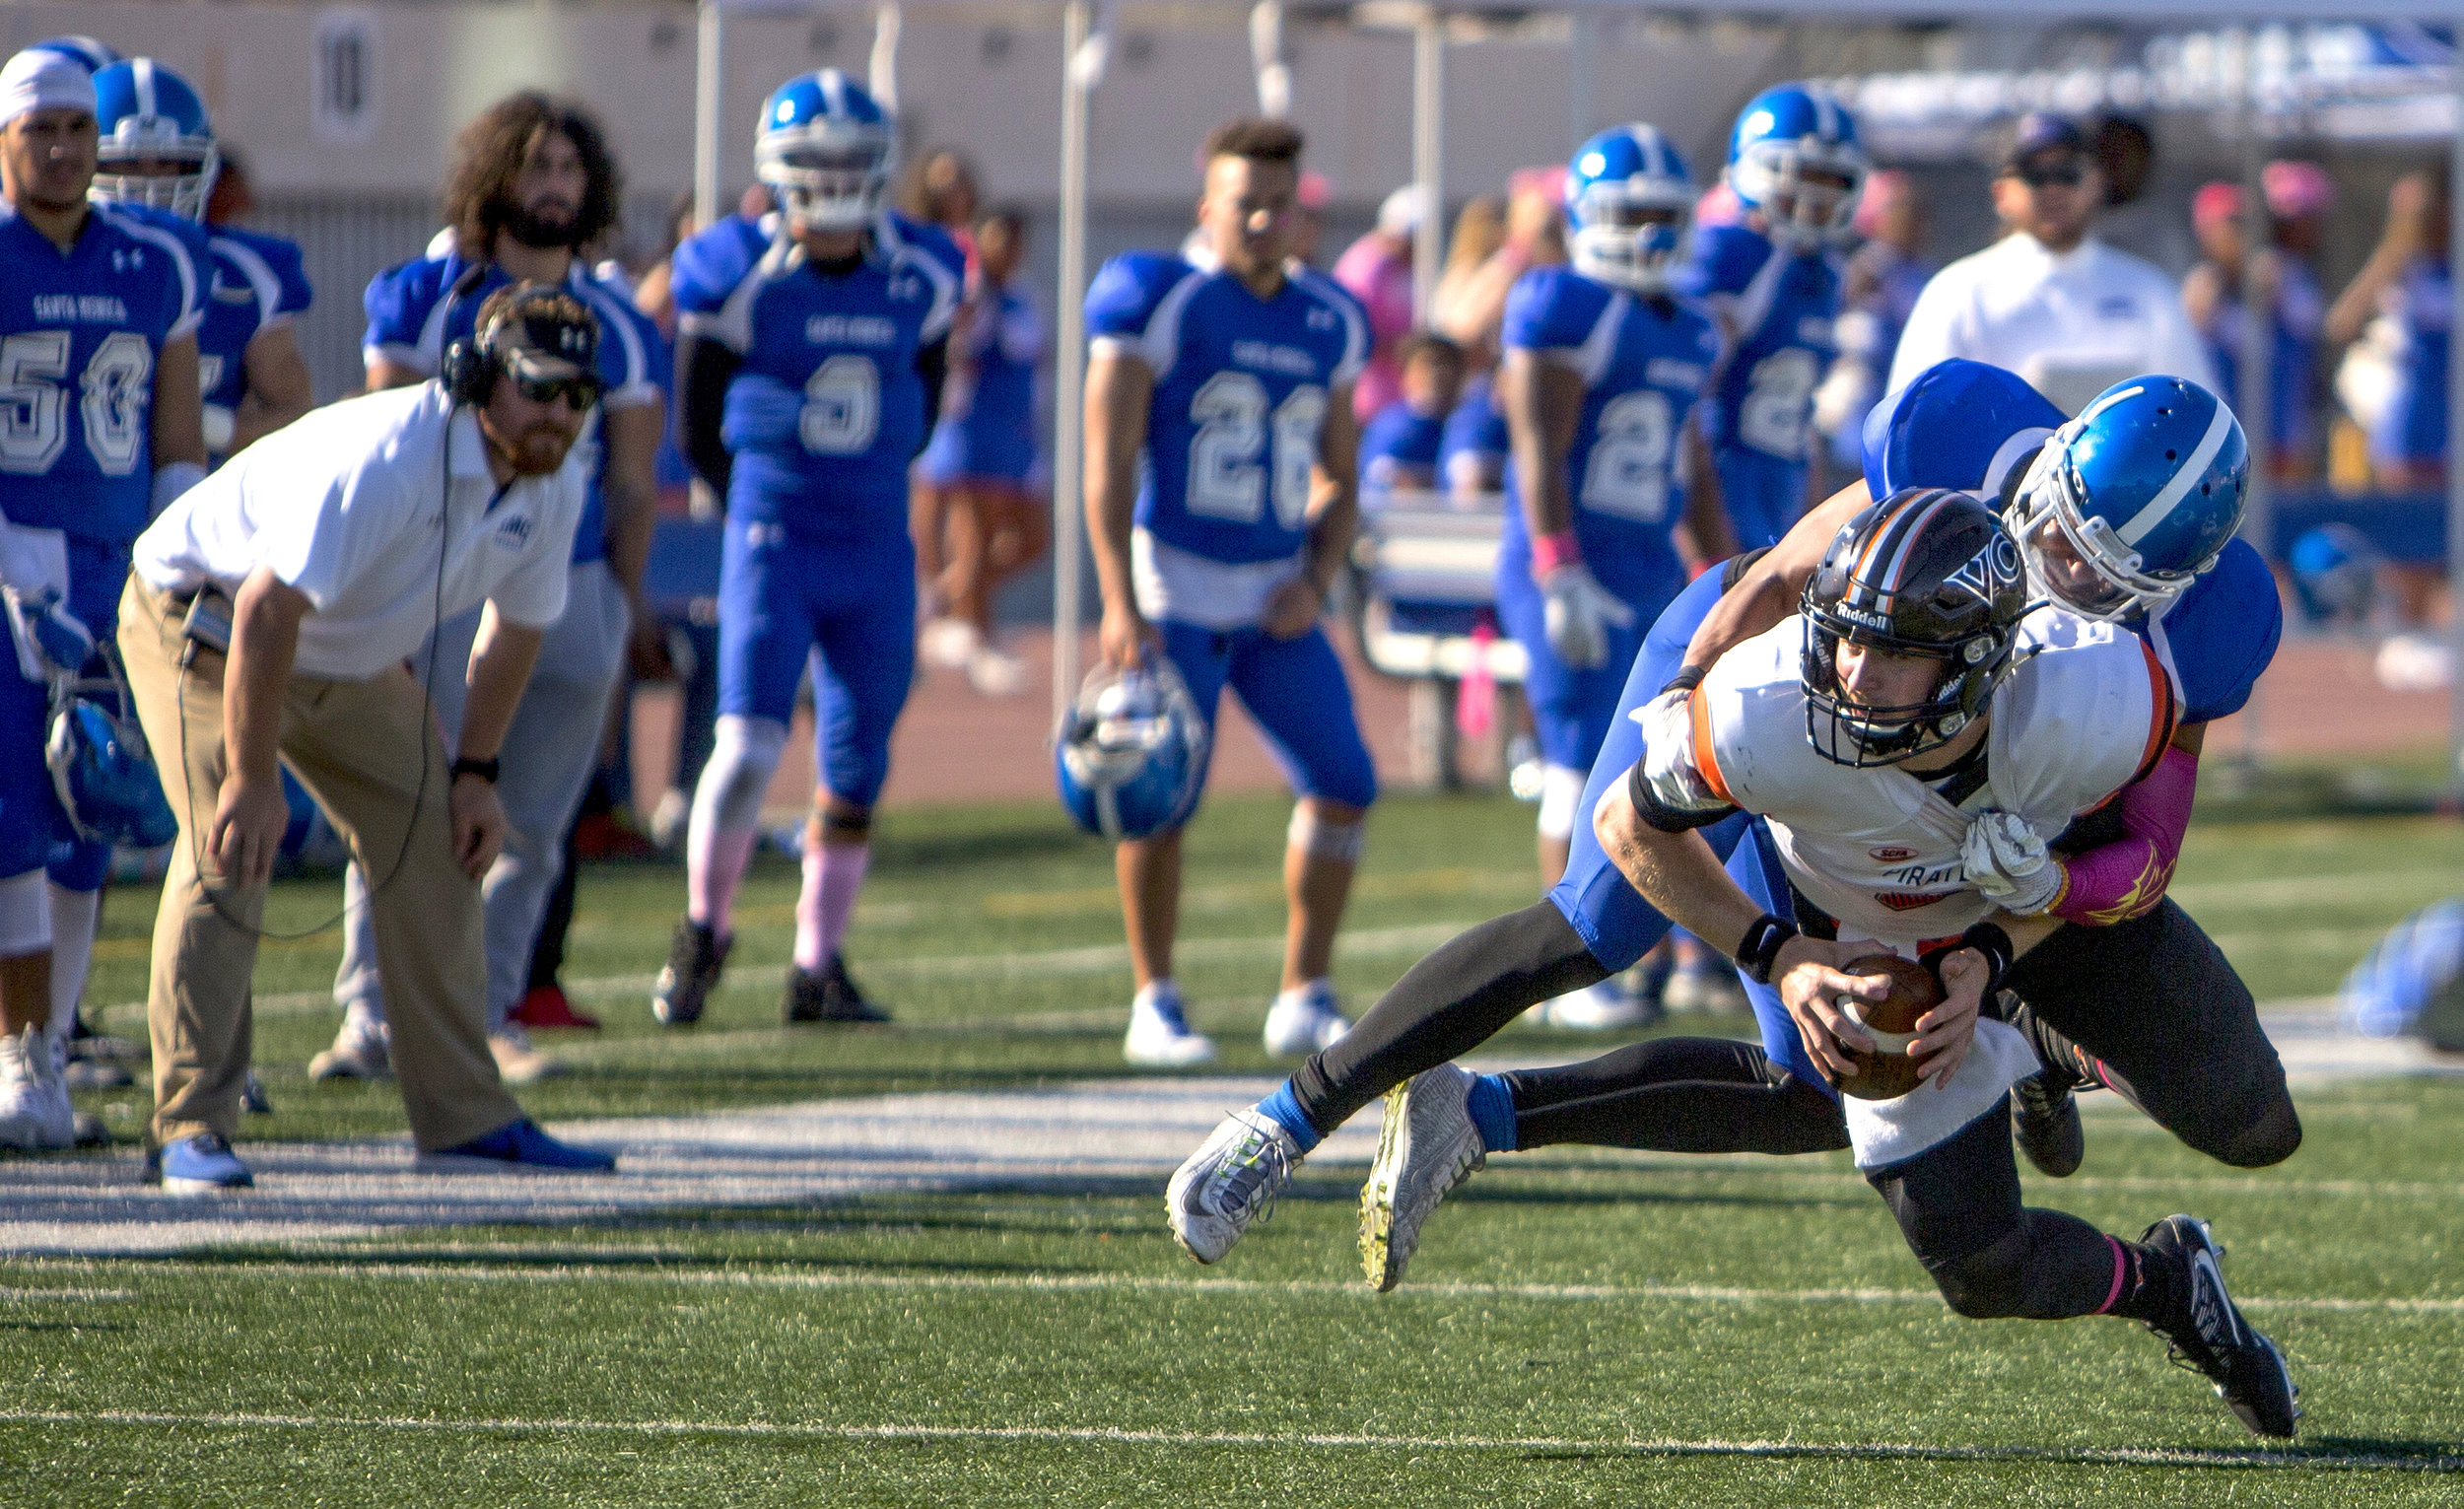  The Santa Monica College Corsairs Mens football linebacker D'Akibba Wallace (3) (blue,left) gets a sack against The Ventura College Pirates quarterback Ricky Town (8) (white,right) , Saturday, October 21st, 2017, at Santa Monica College in Santa Mon